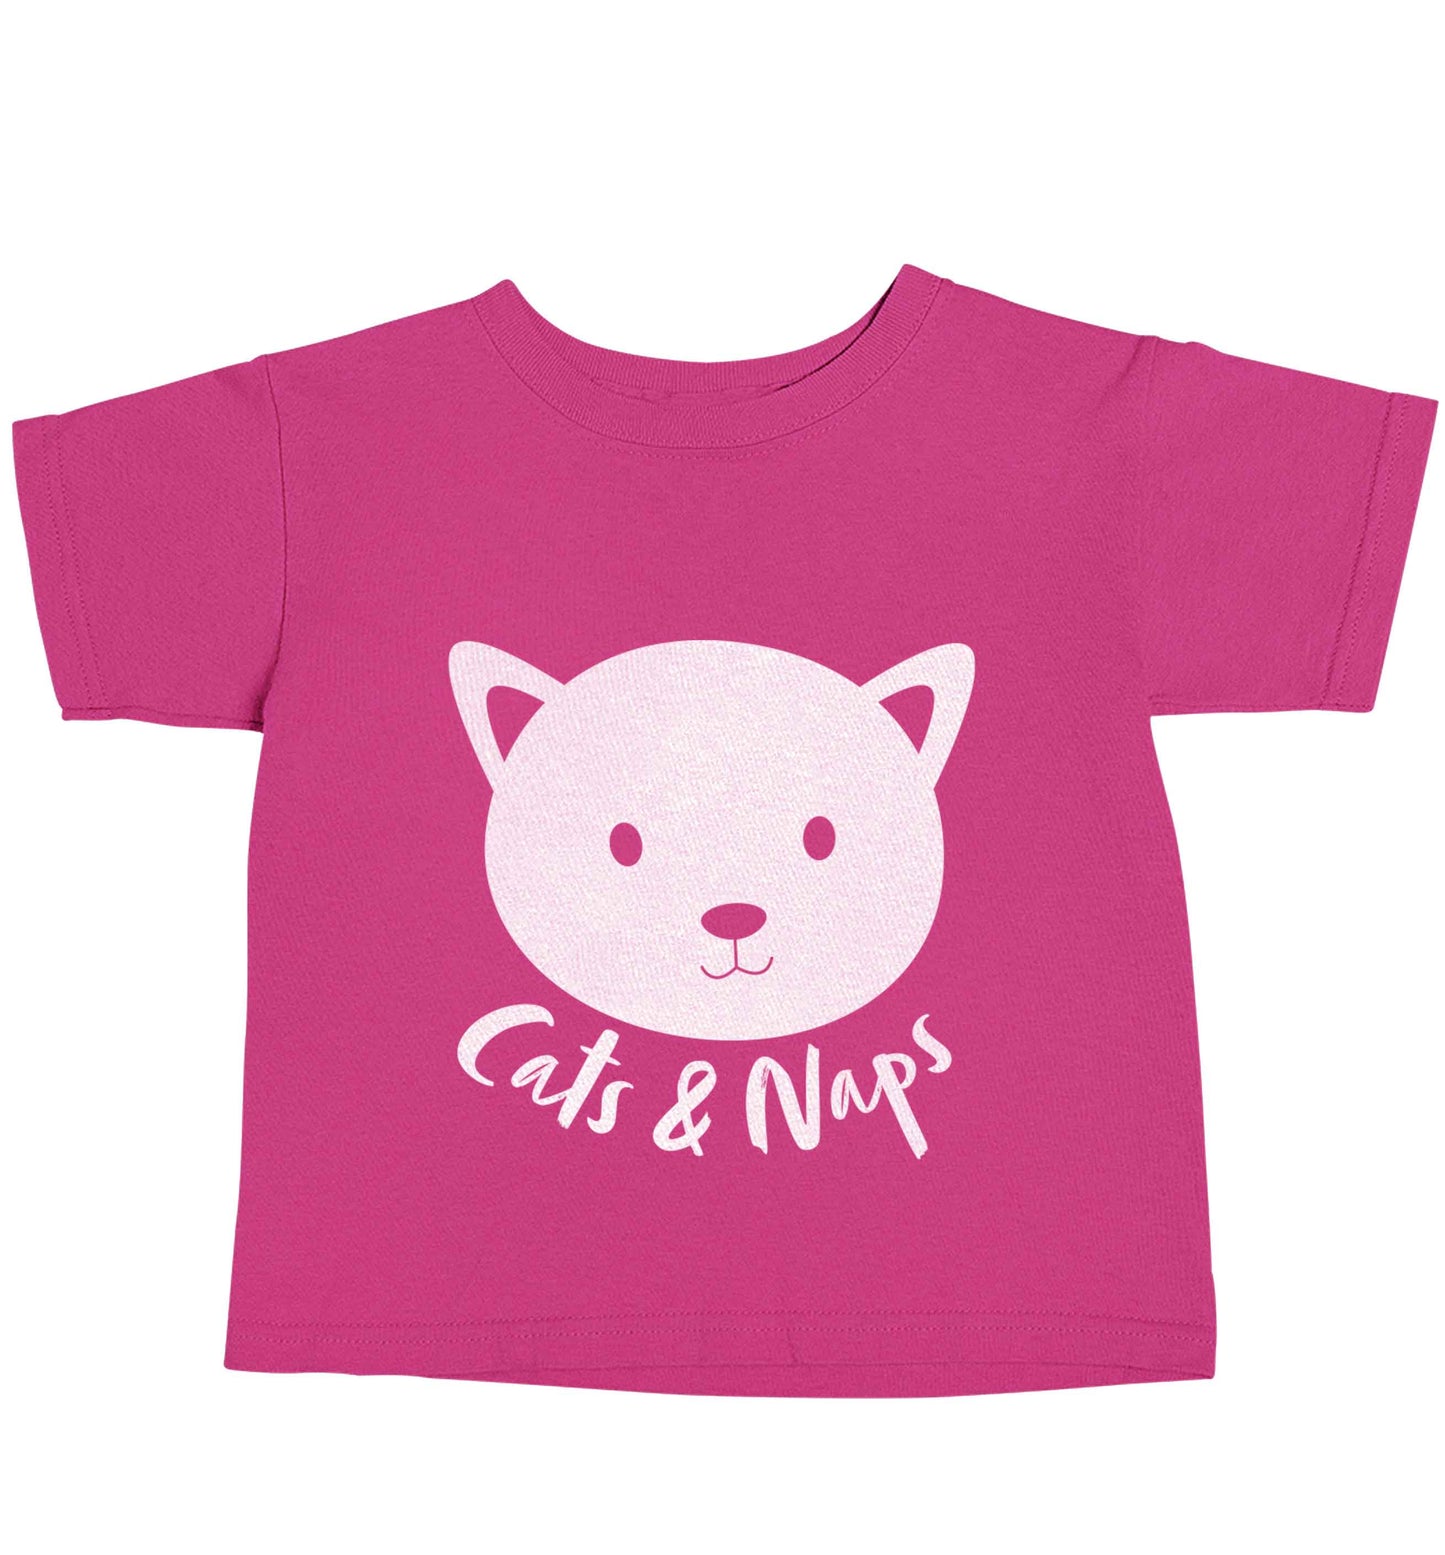 Cats and naps Kit pink baby toddler Tshirt 2 Years